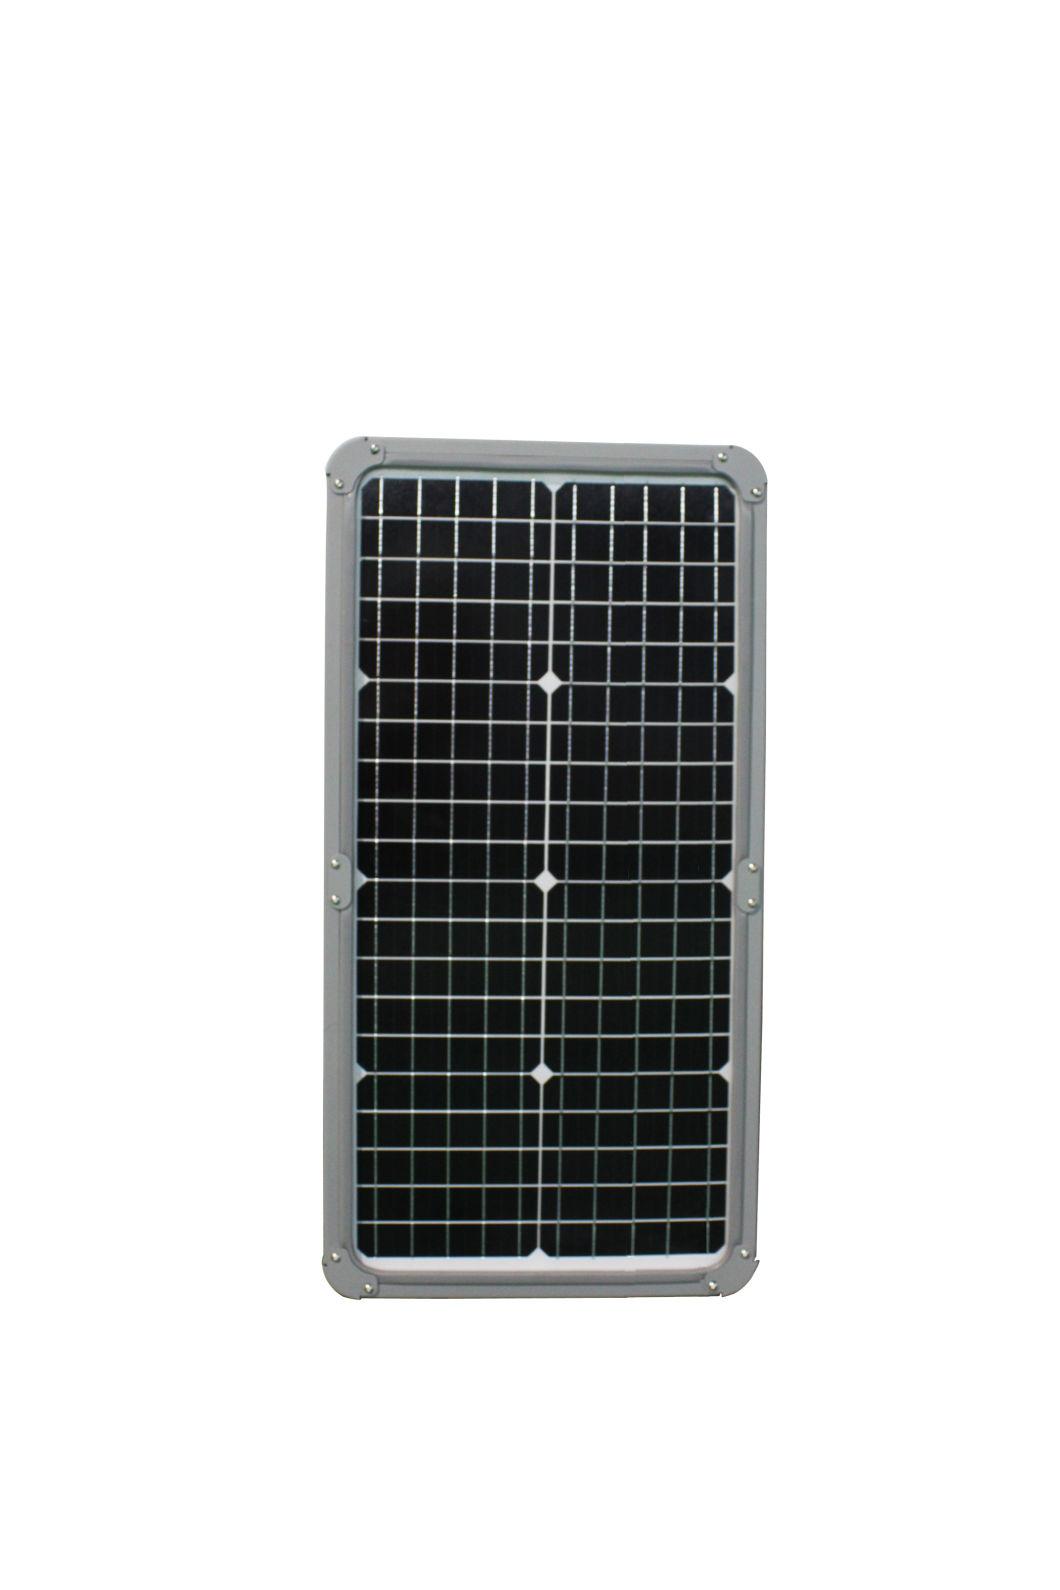 LED All in One Solar Street Light 30watts High Power 20W for Road